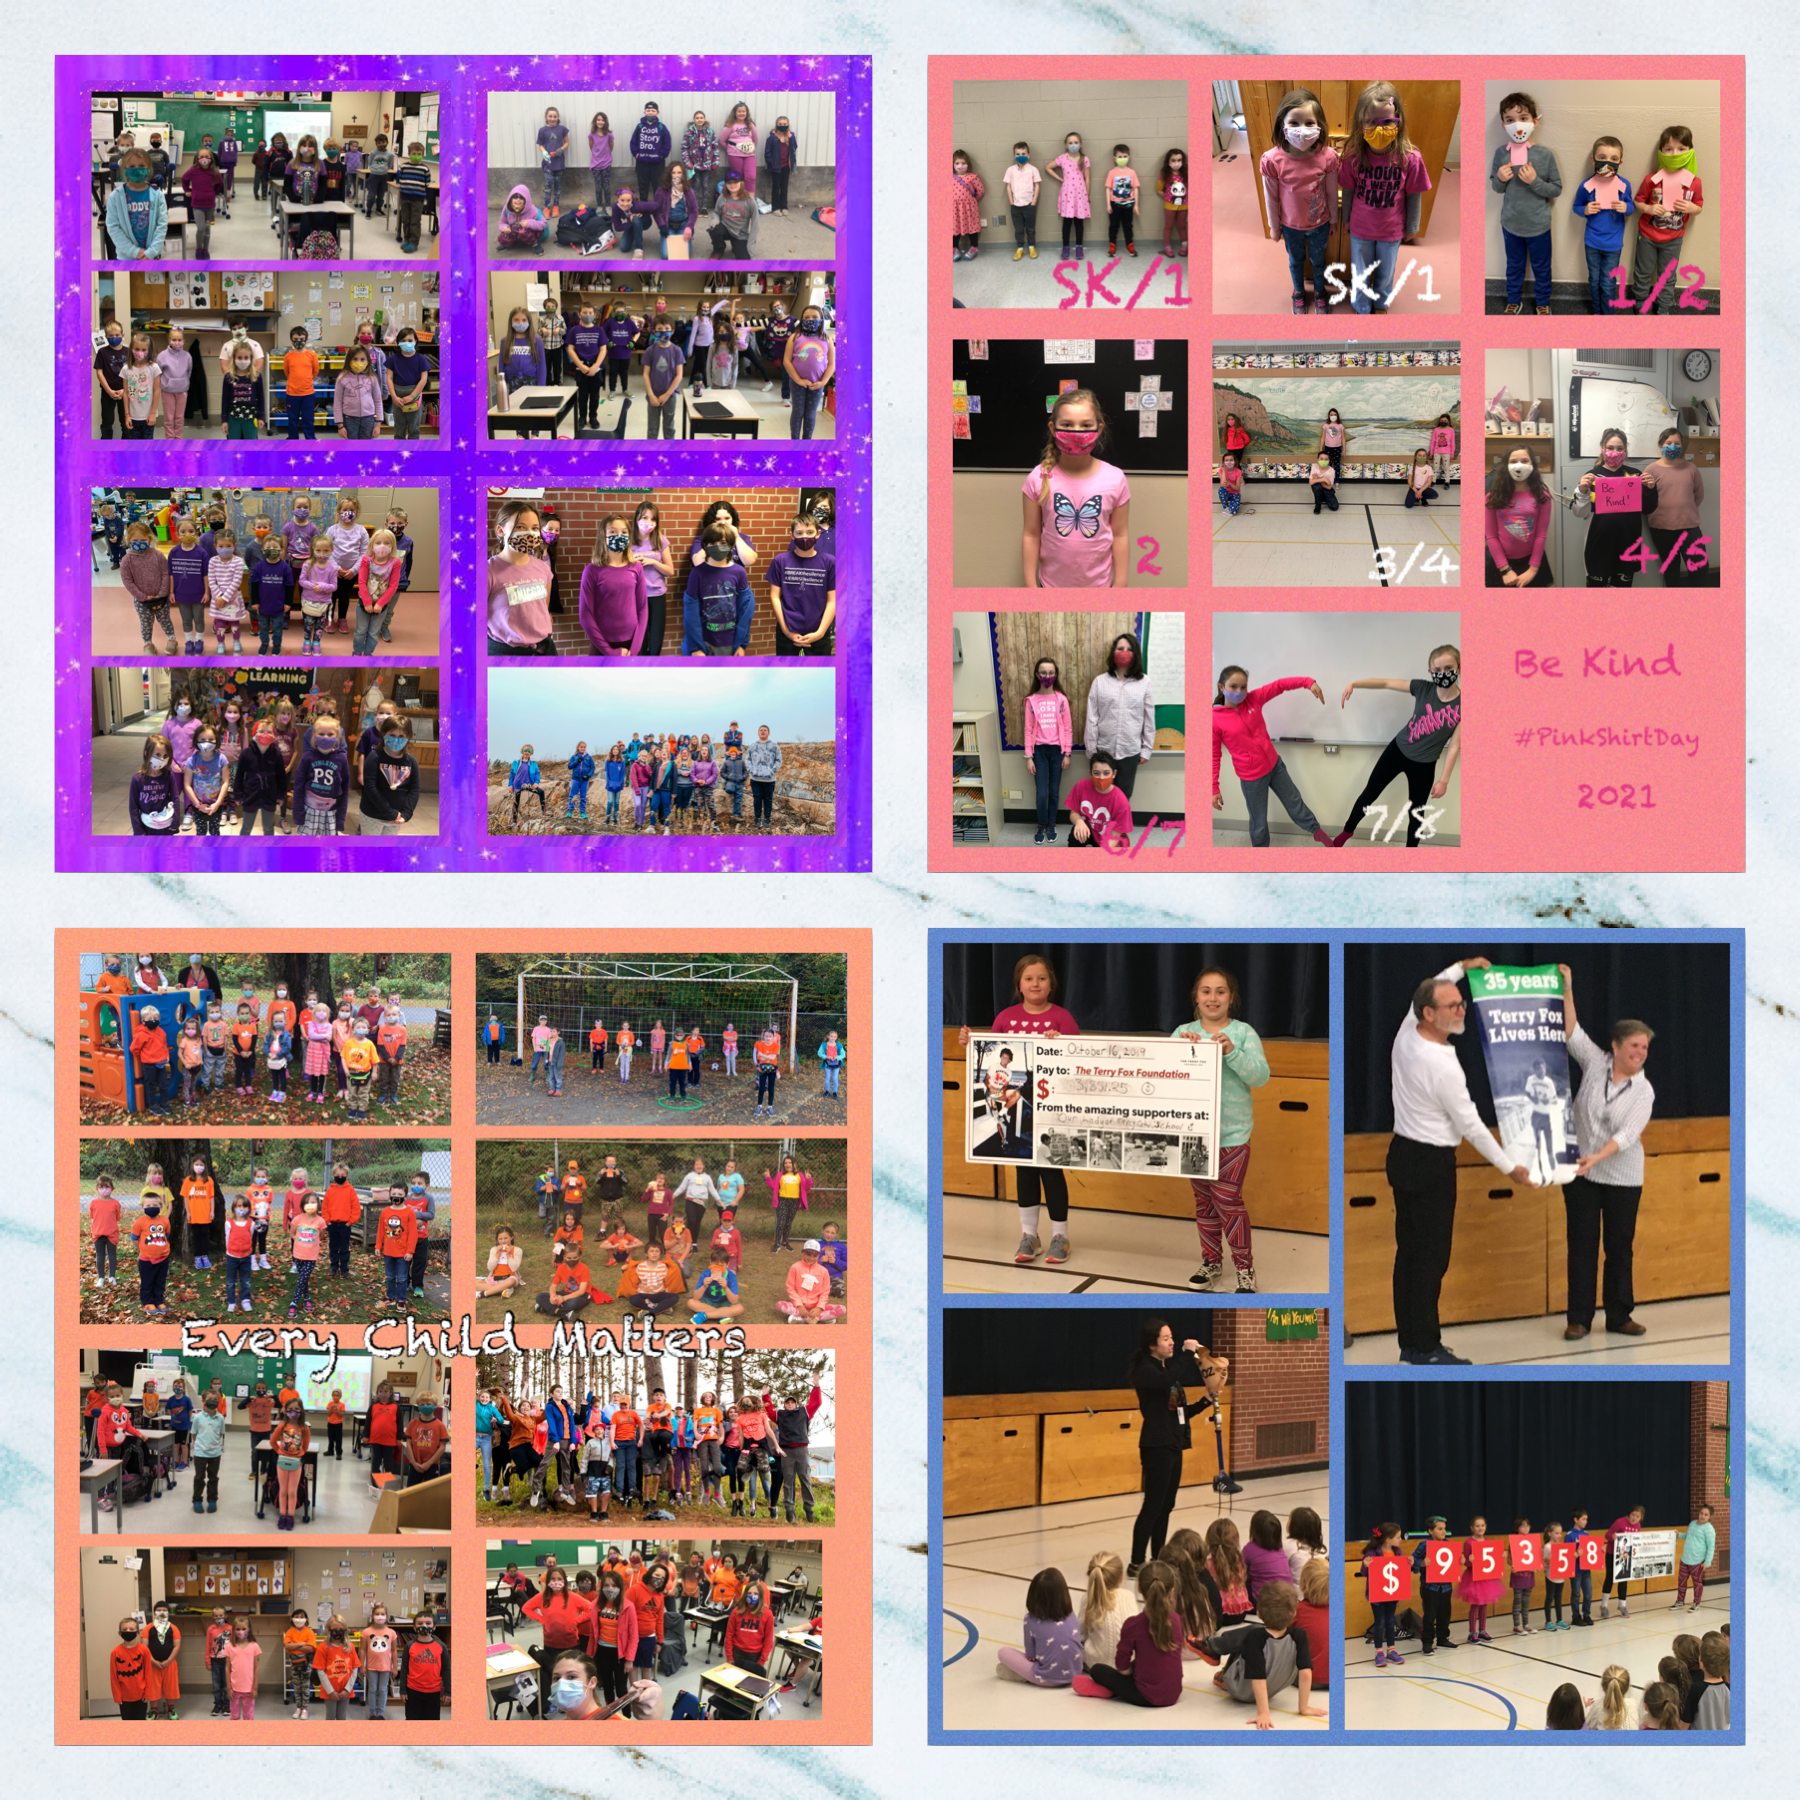  Collage of photos representing Social Justice activities/